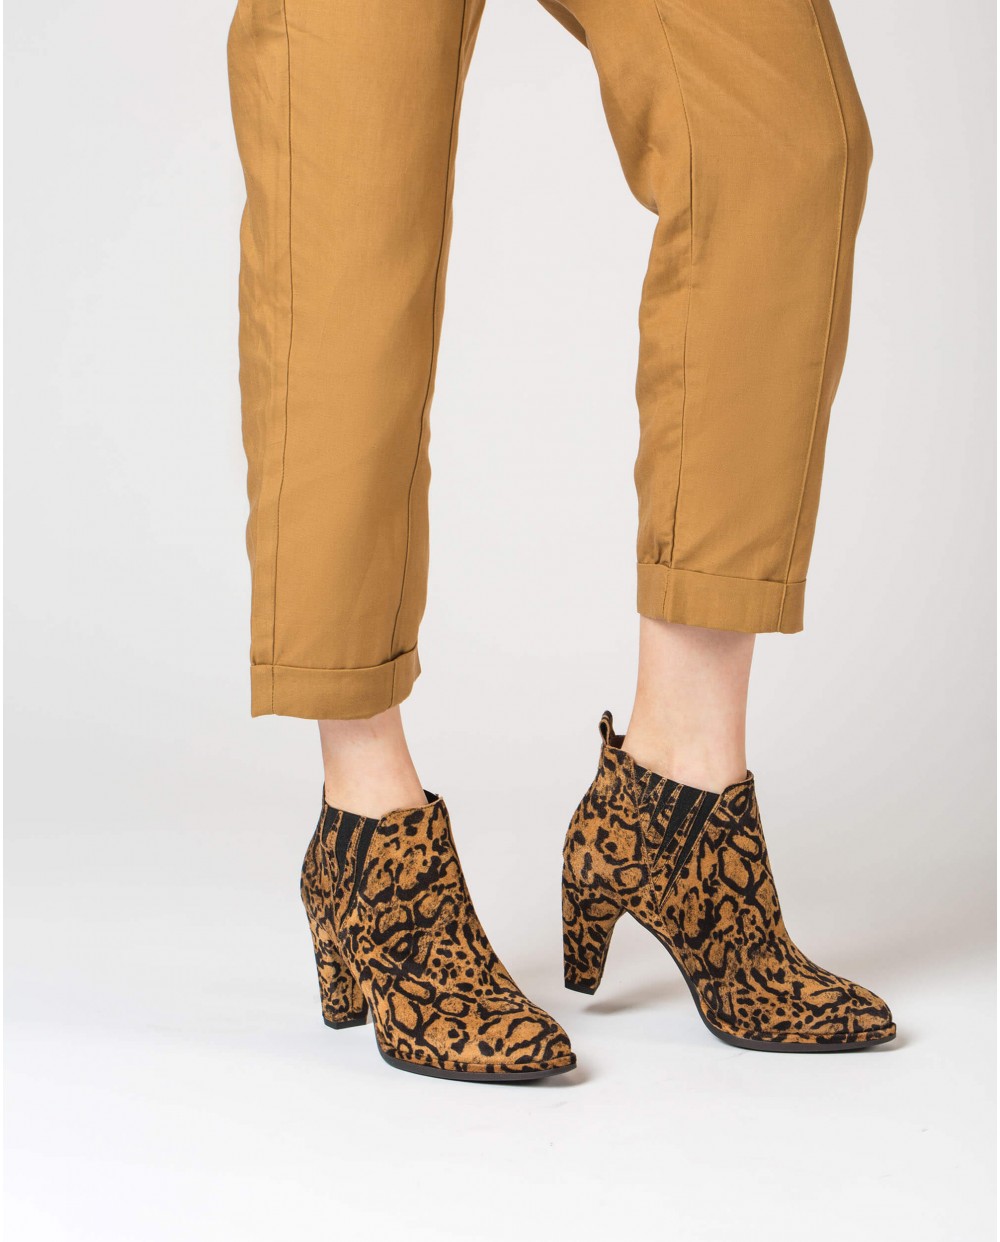 Wonders-Ankle Boots-Animal print ankle boot